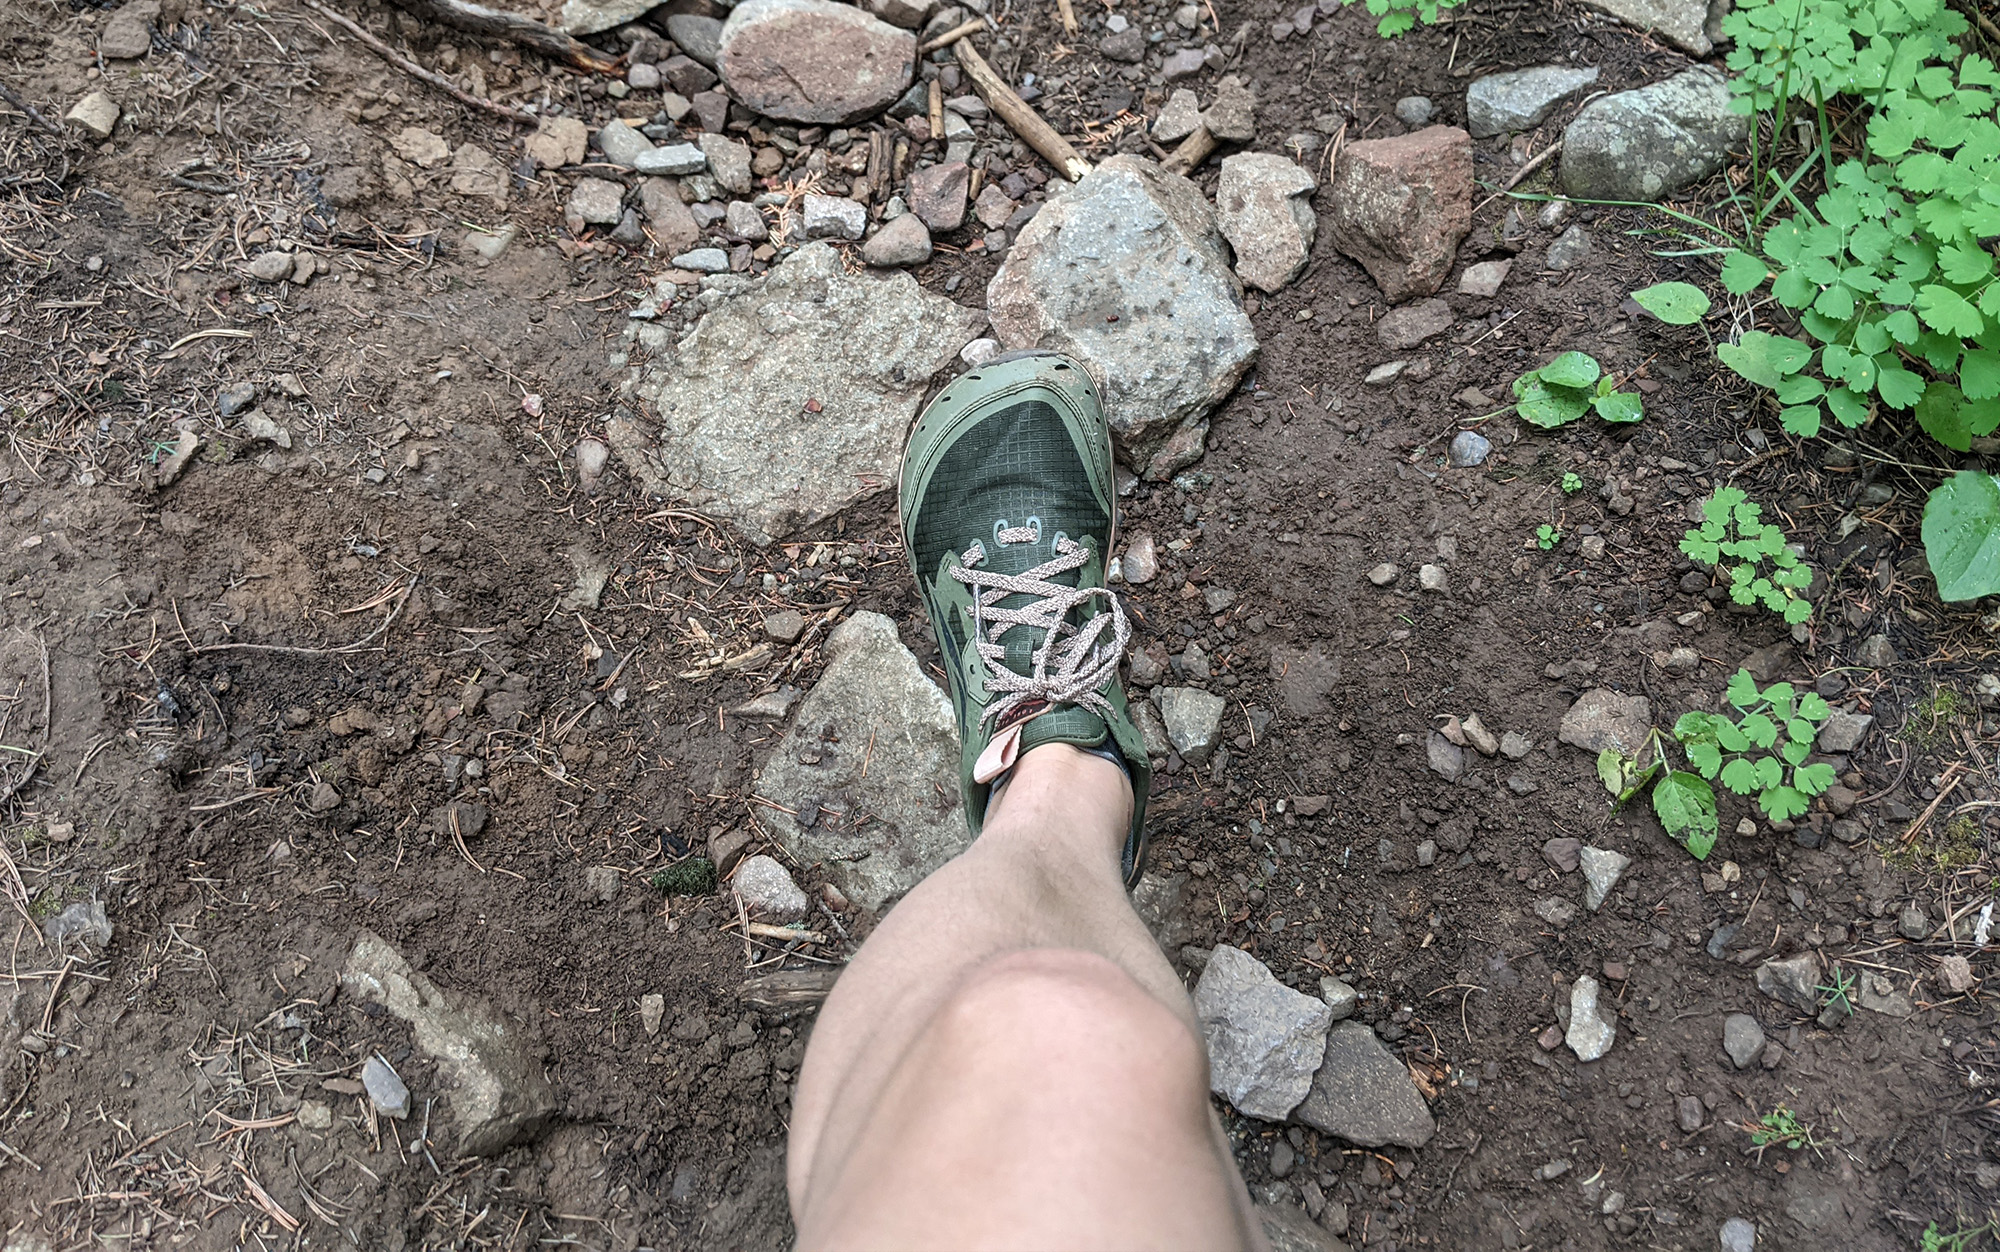 The Altra Lone Peaks started out as the perfect shoe for rocky trails, but eventually proved to be too tall for this barefoot-style hiker.